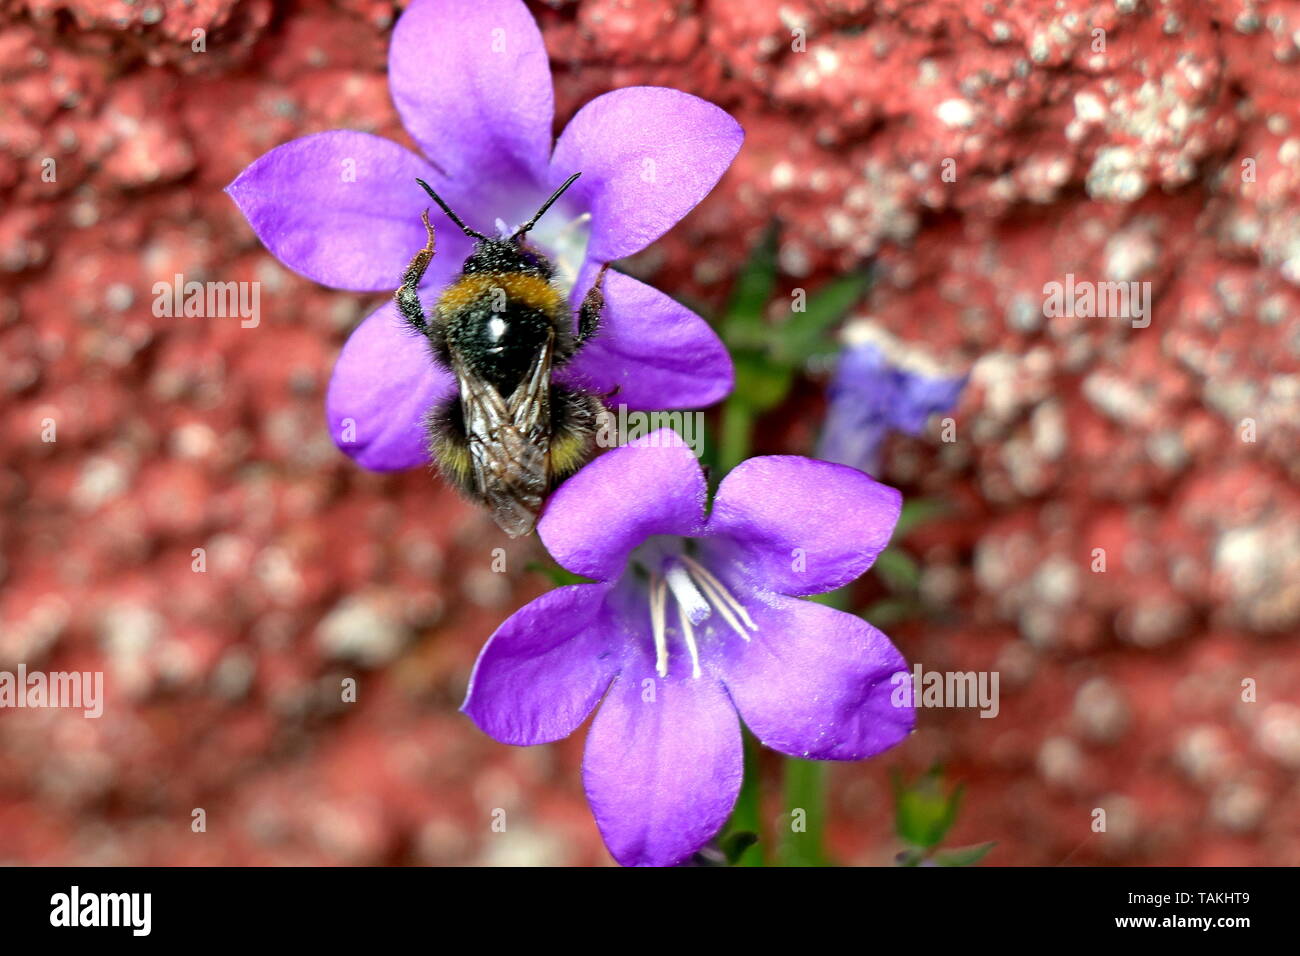 Bumble Bee, Bombus, on Campanula Portenschlagiana, dalmatian bellflower, or Campanula Muralis, with a mass of bell-shaped violet coloured blooms Stock Photo